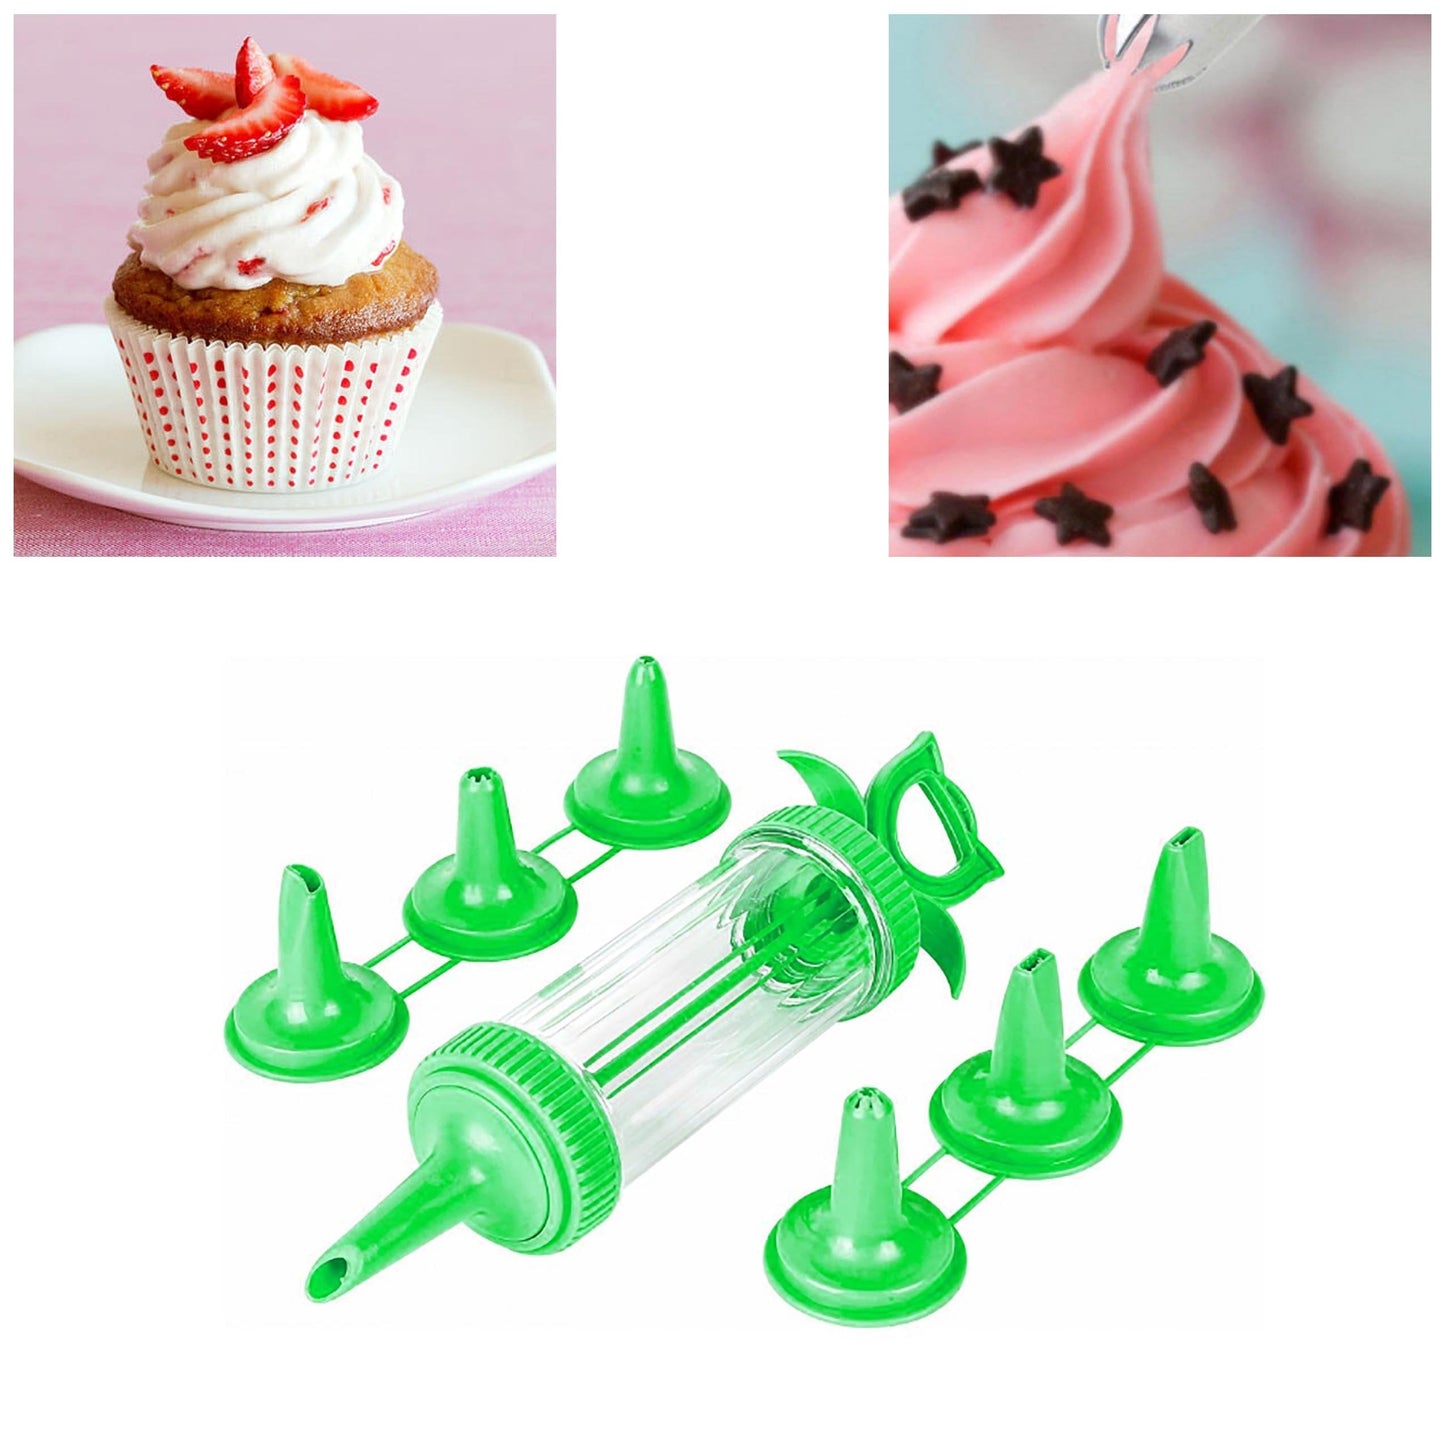 Plastic Icing Tube With 6 Nozzles Attached In Green 9266 (Parcel Rate)